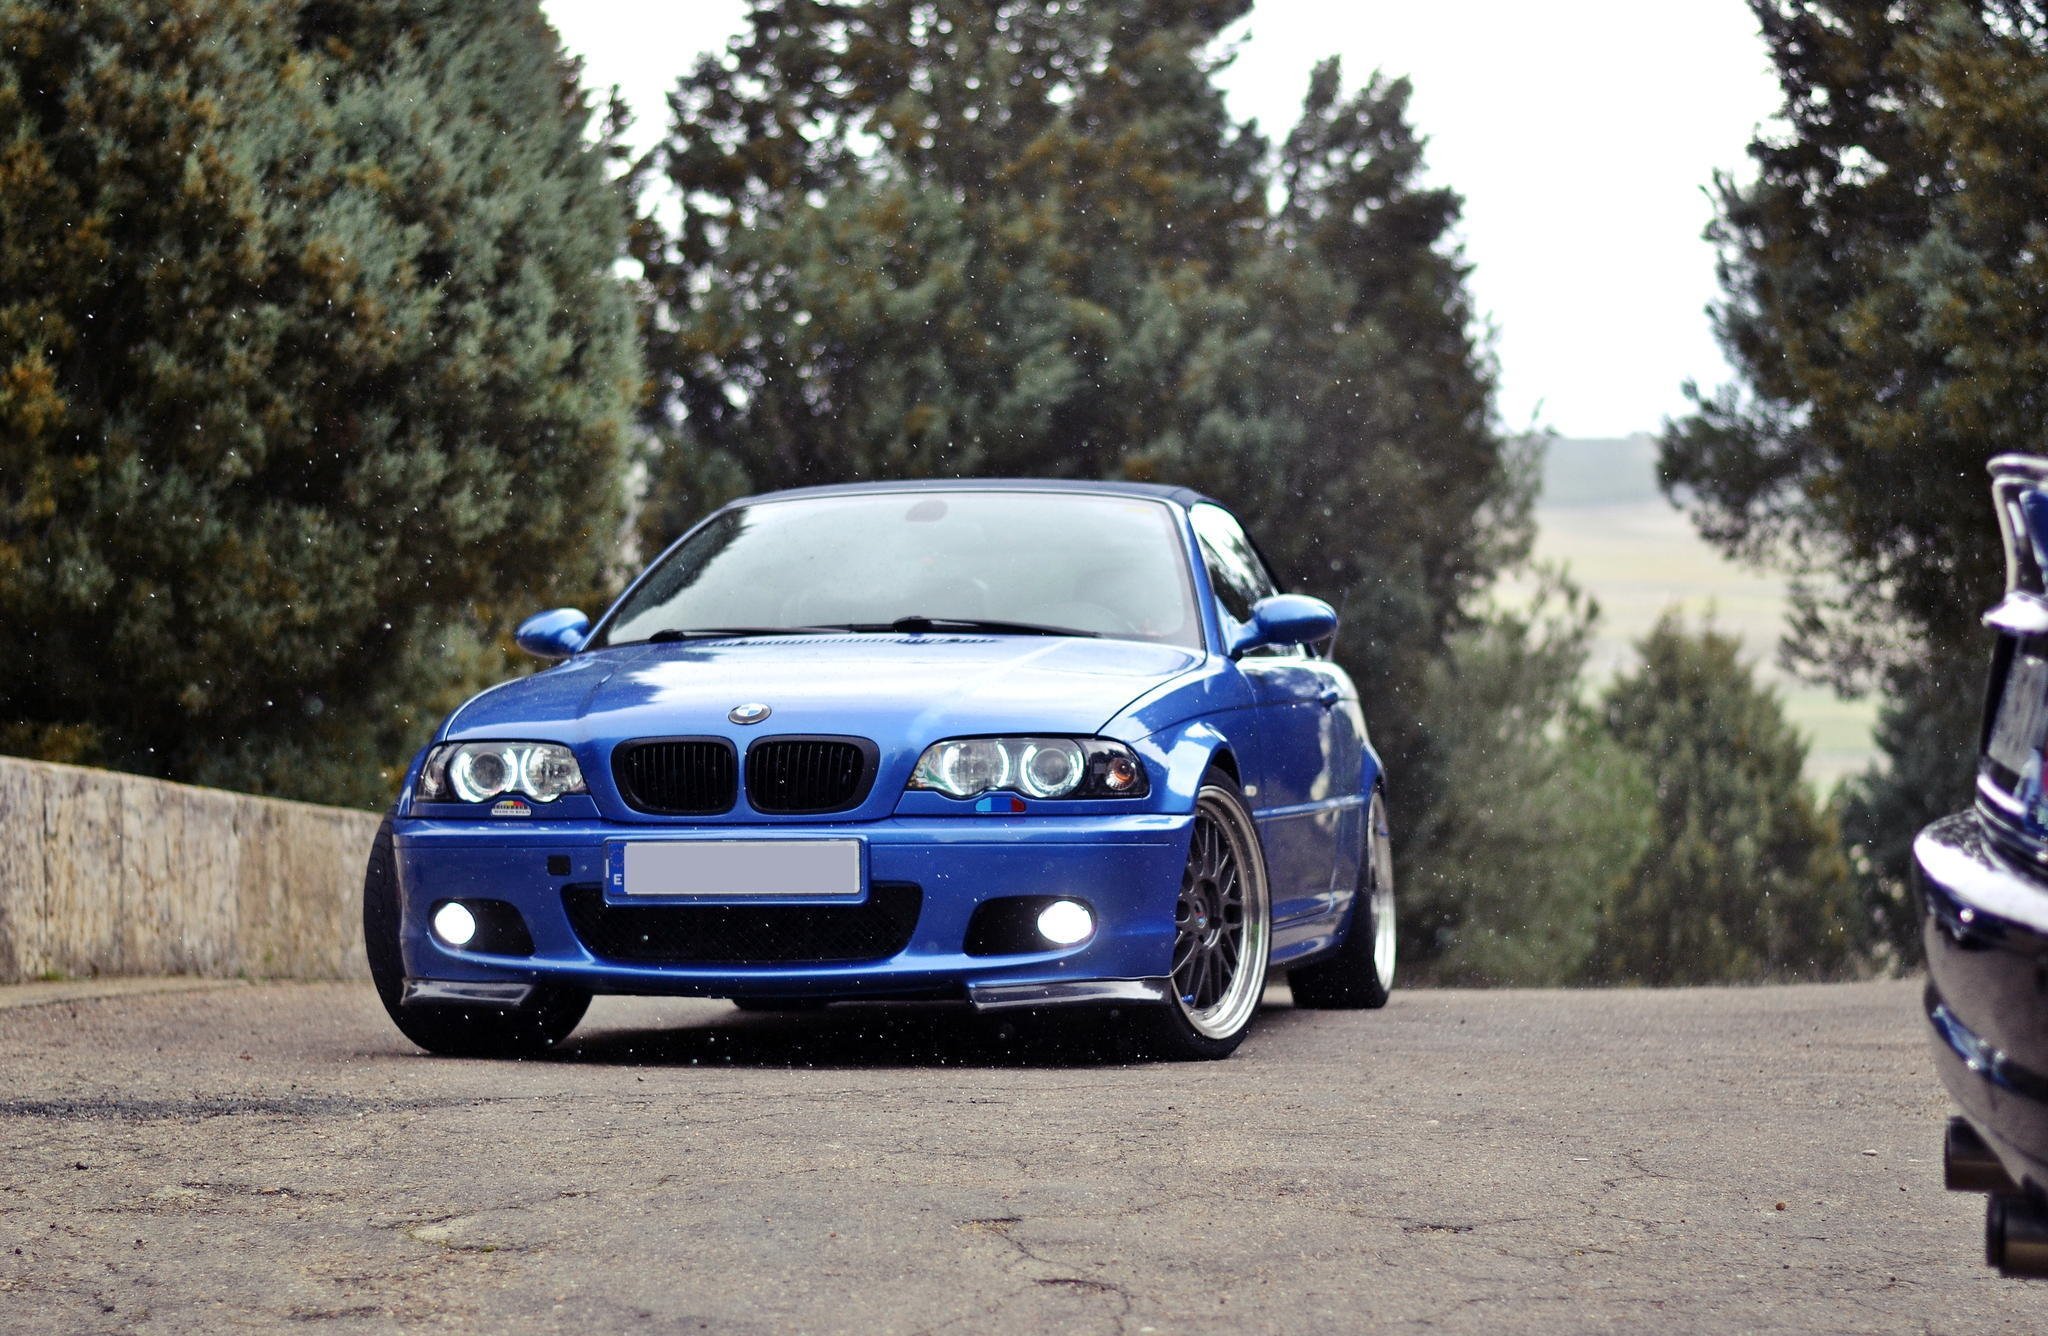 Bmw E46 330 Blue Bbs Car Wallpapers Hd Desktop And Mobile Backgrounds